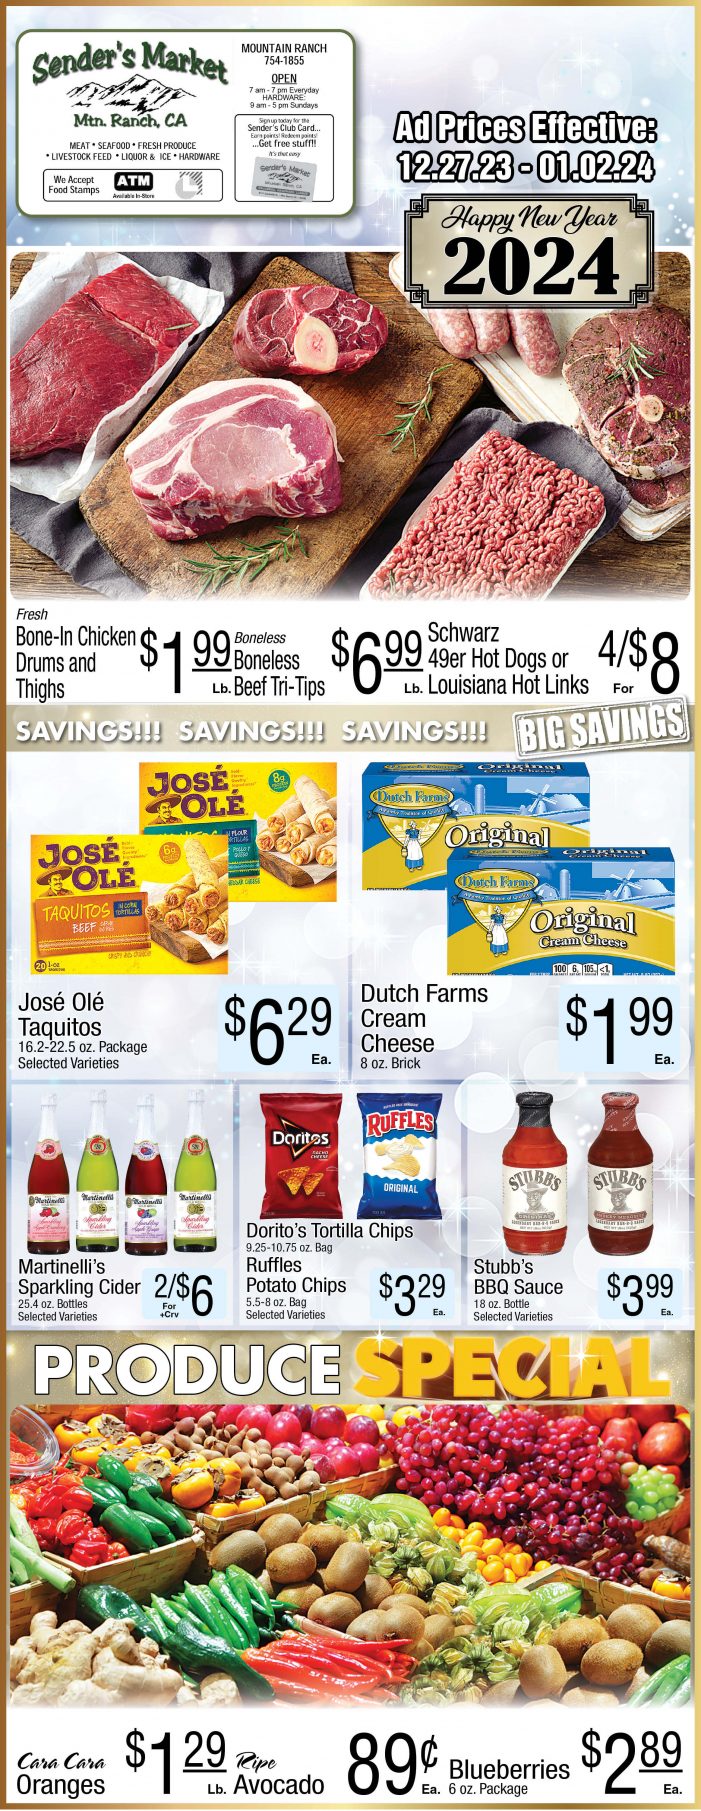 Sender’s Market New Years Ad & Grocery Specials Through January 2nd! Shop Local & Save!!